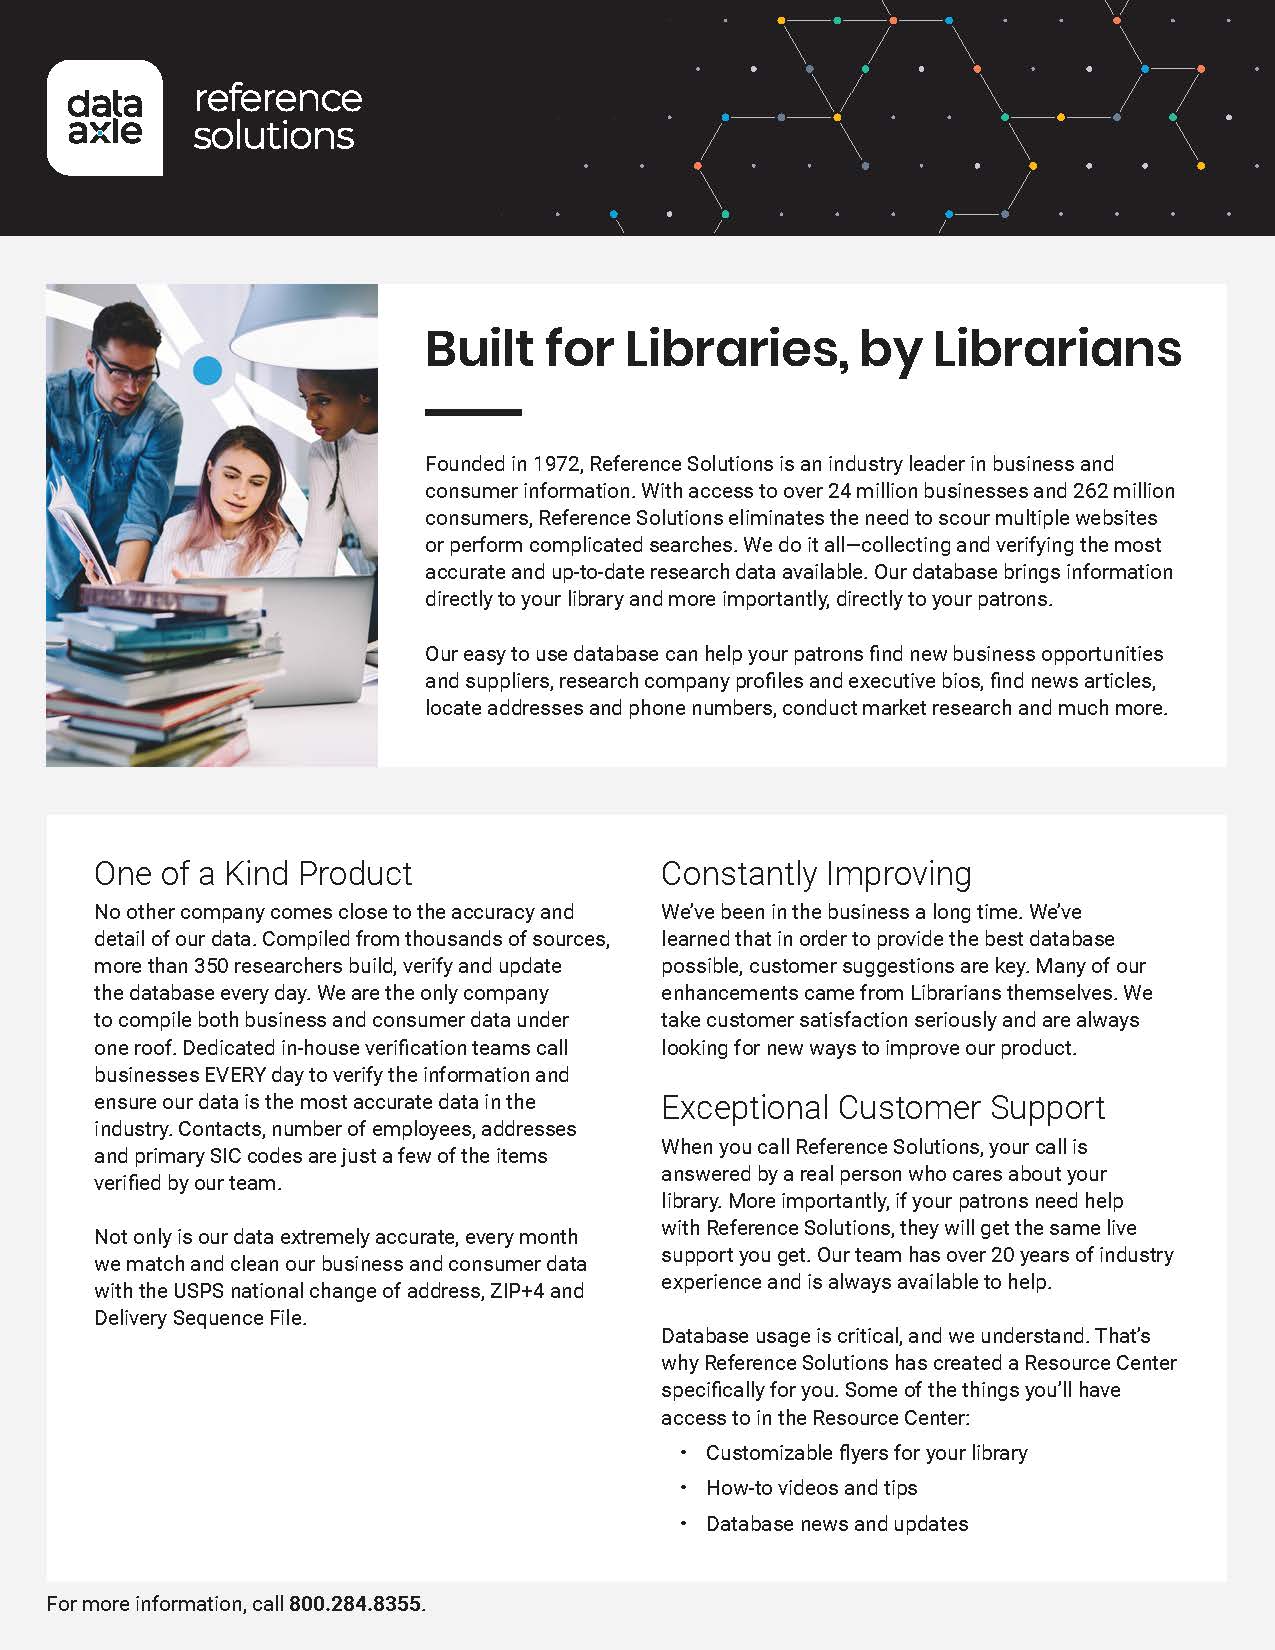 A flyer for Data Axle explaining why it is useful for libraries.